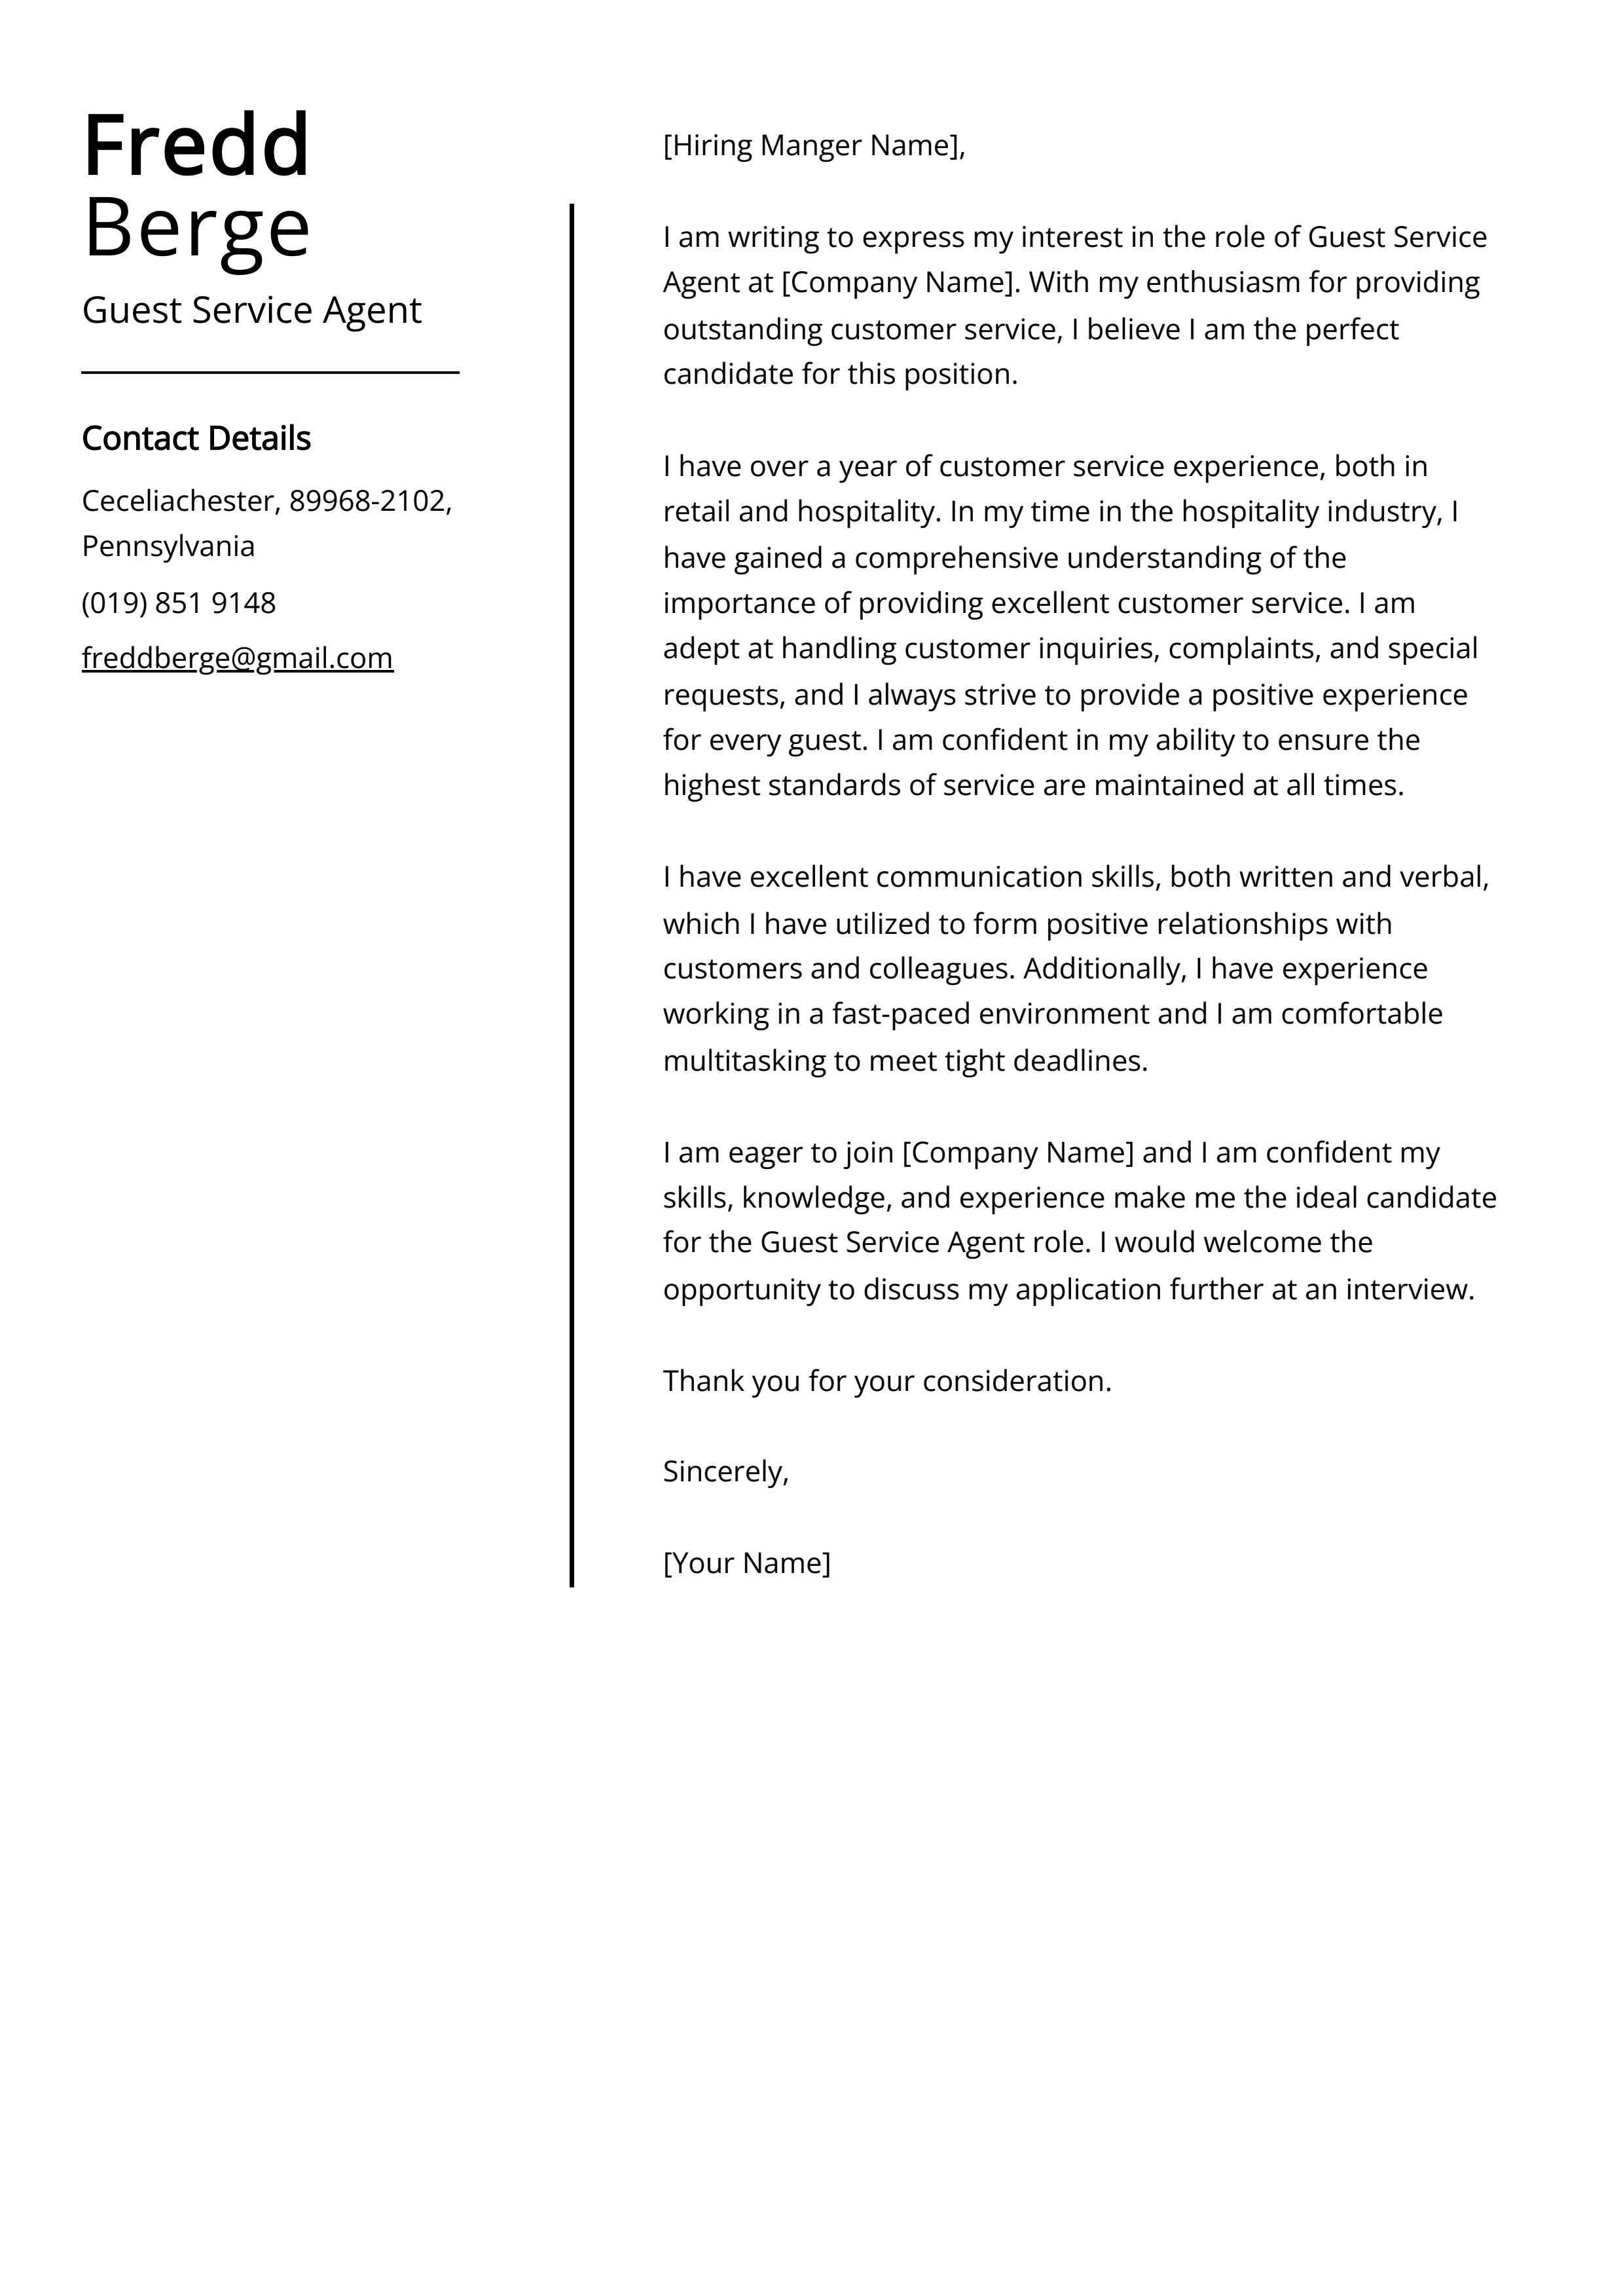 Guest Service Agent Cover Letter Example